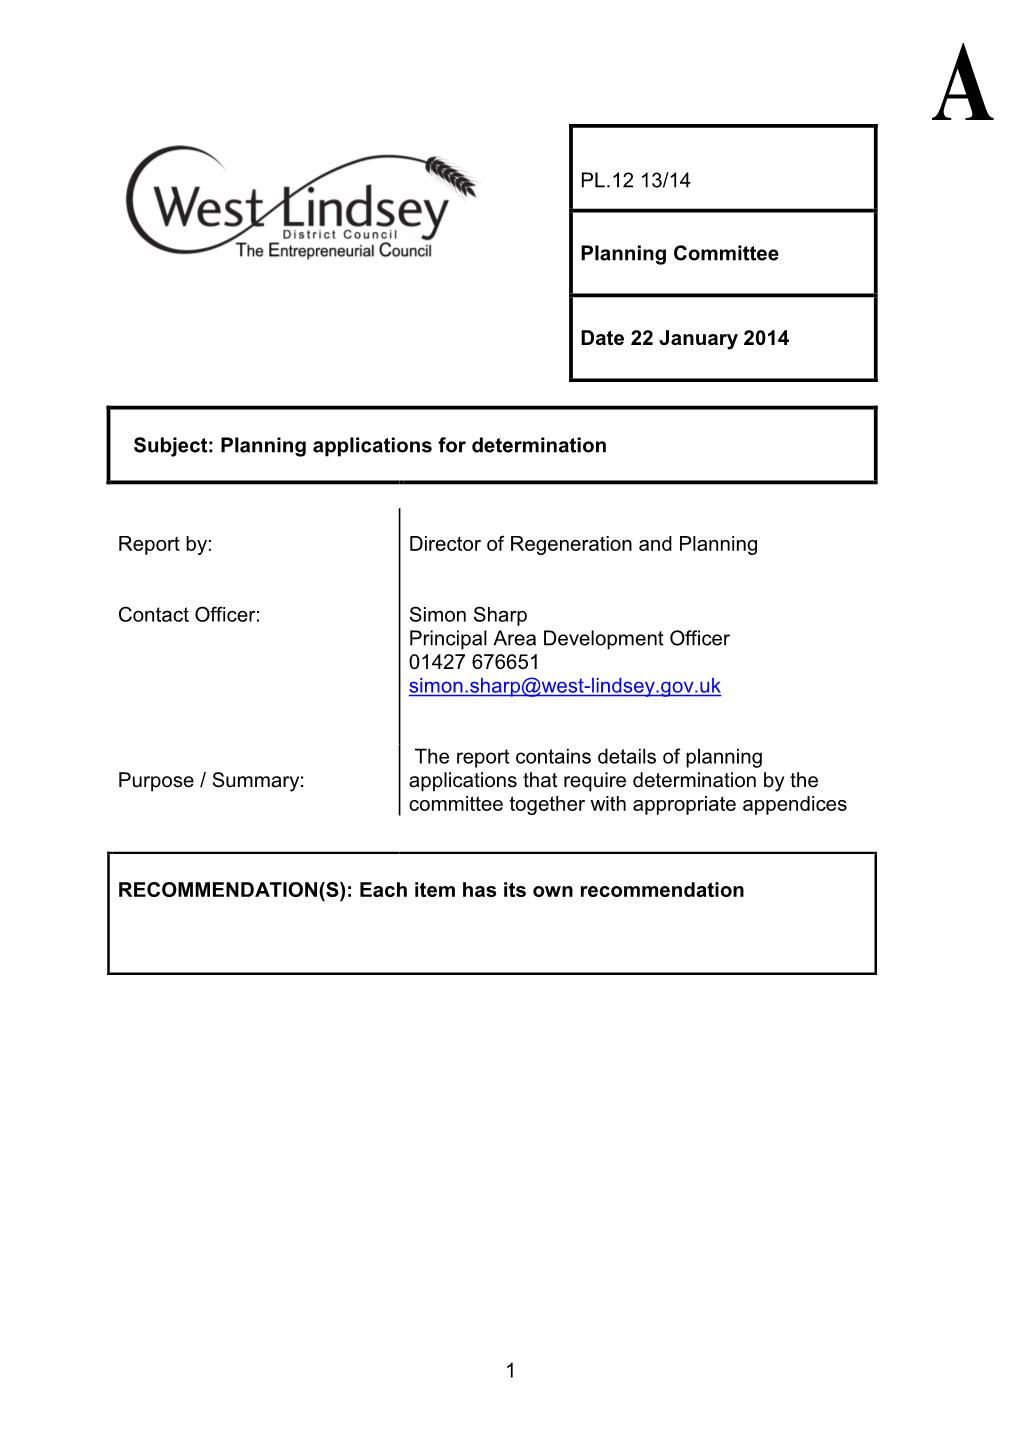 Planning Applications for Determination Report By